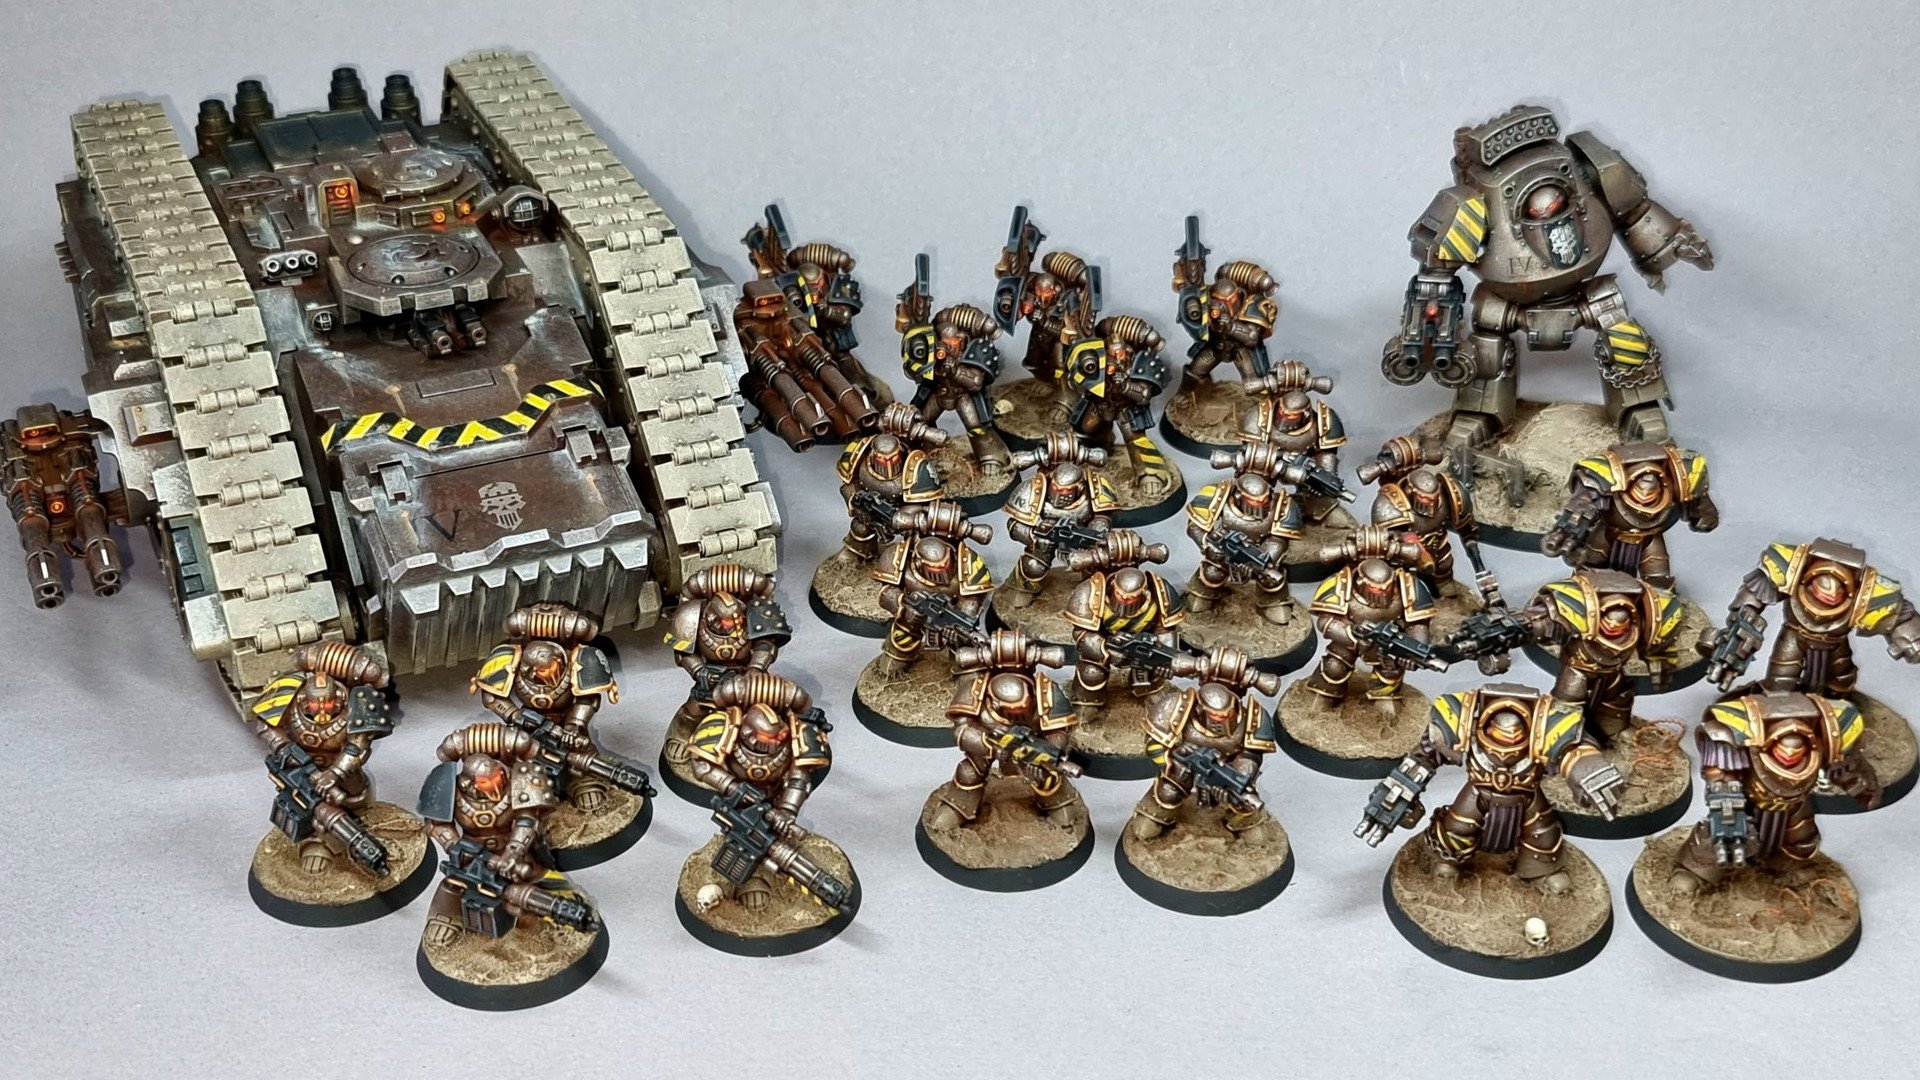 Iron Warriors army painted by Gonders - a force of infantry, terminators, a spartan assault tank and dreadnought